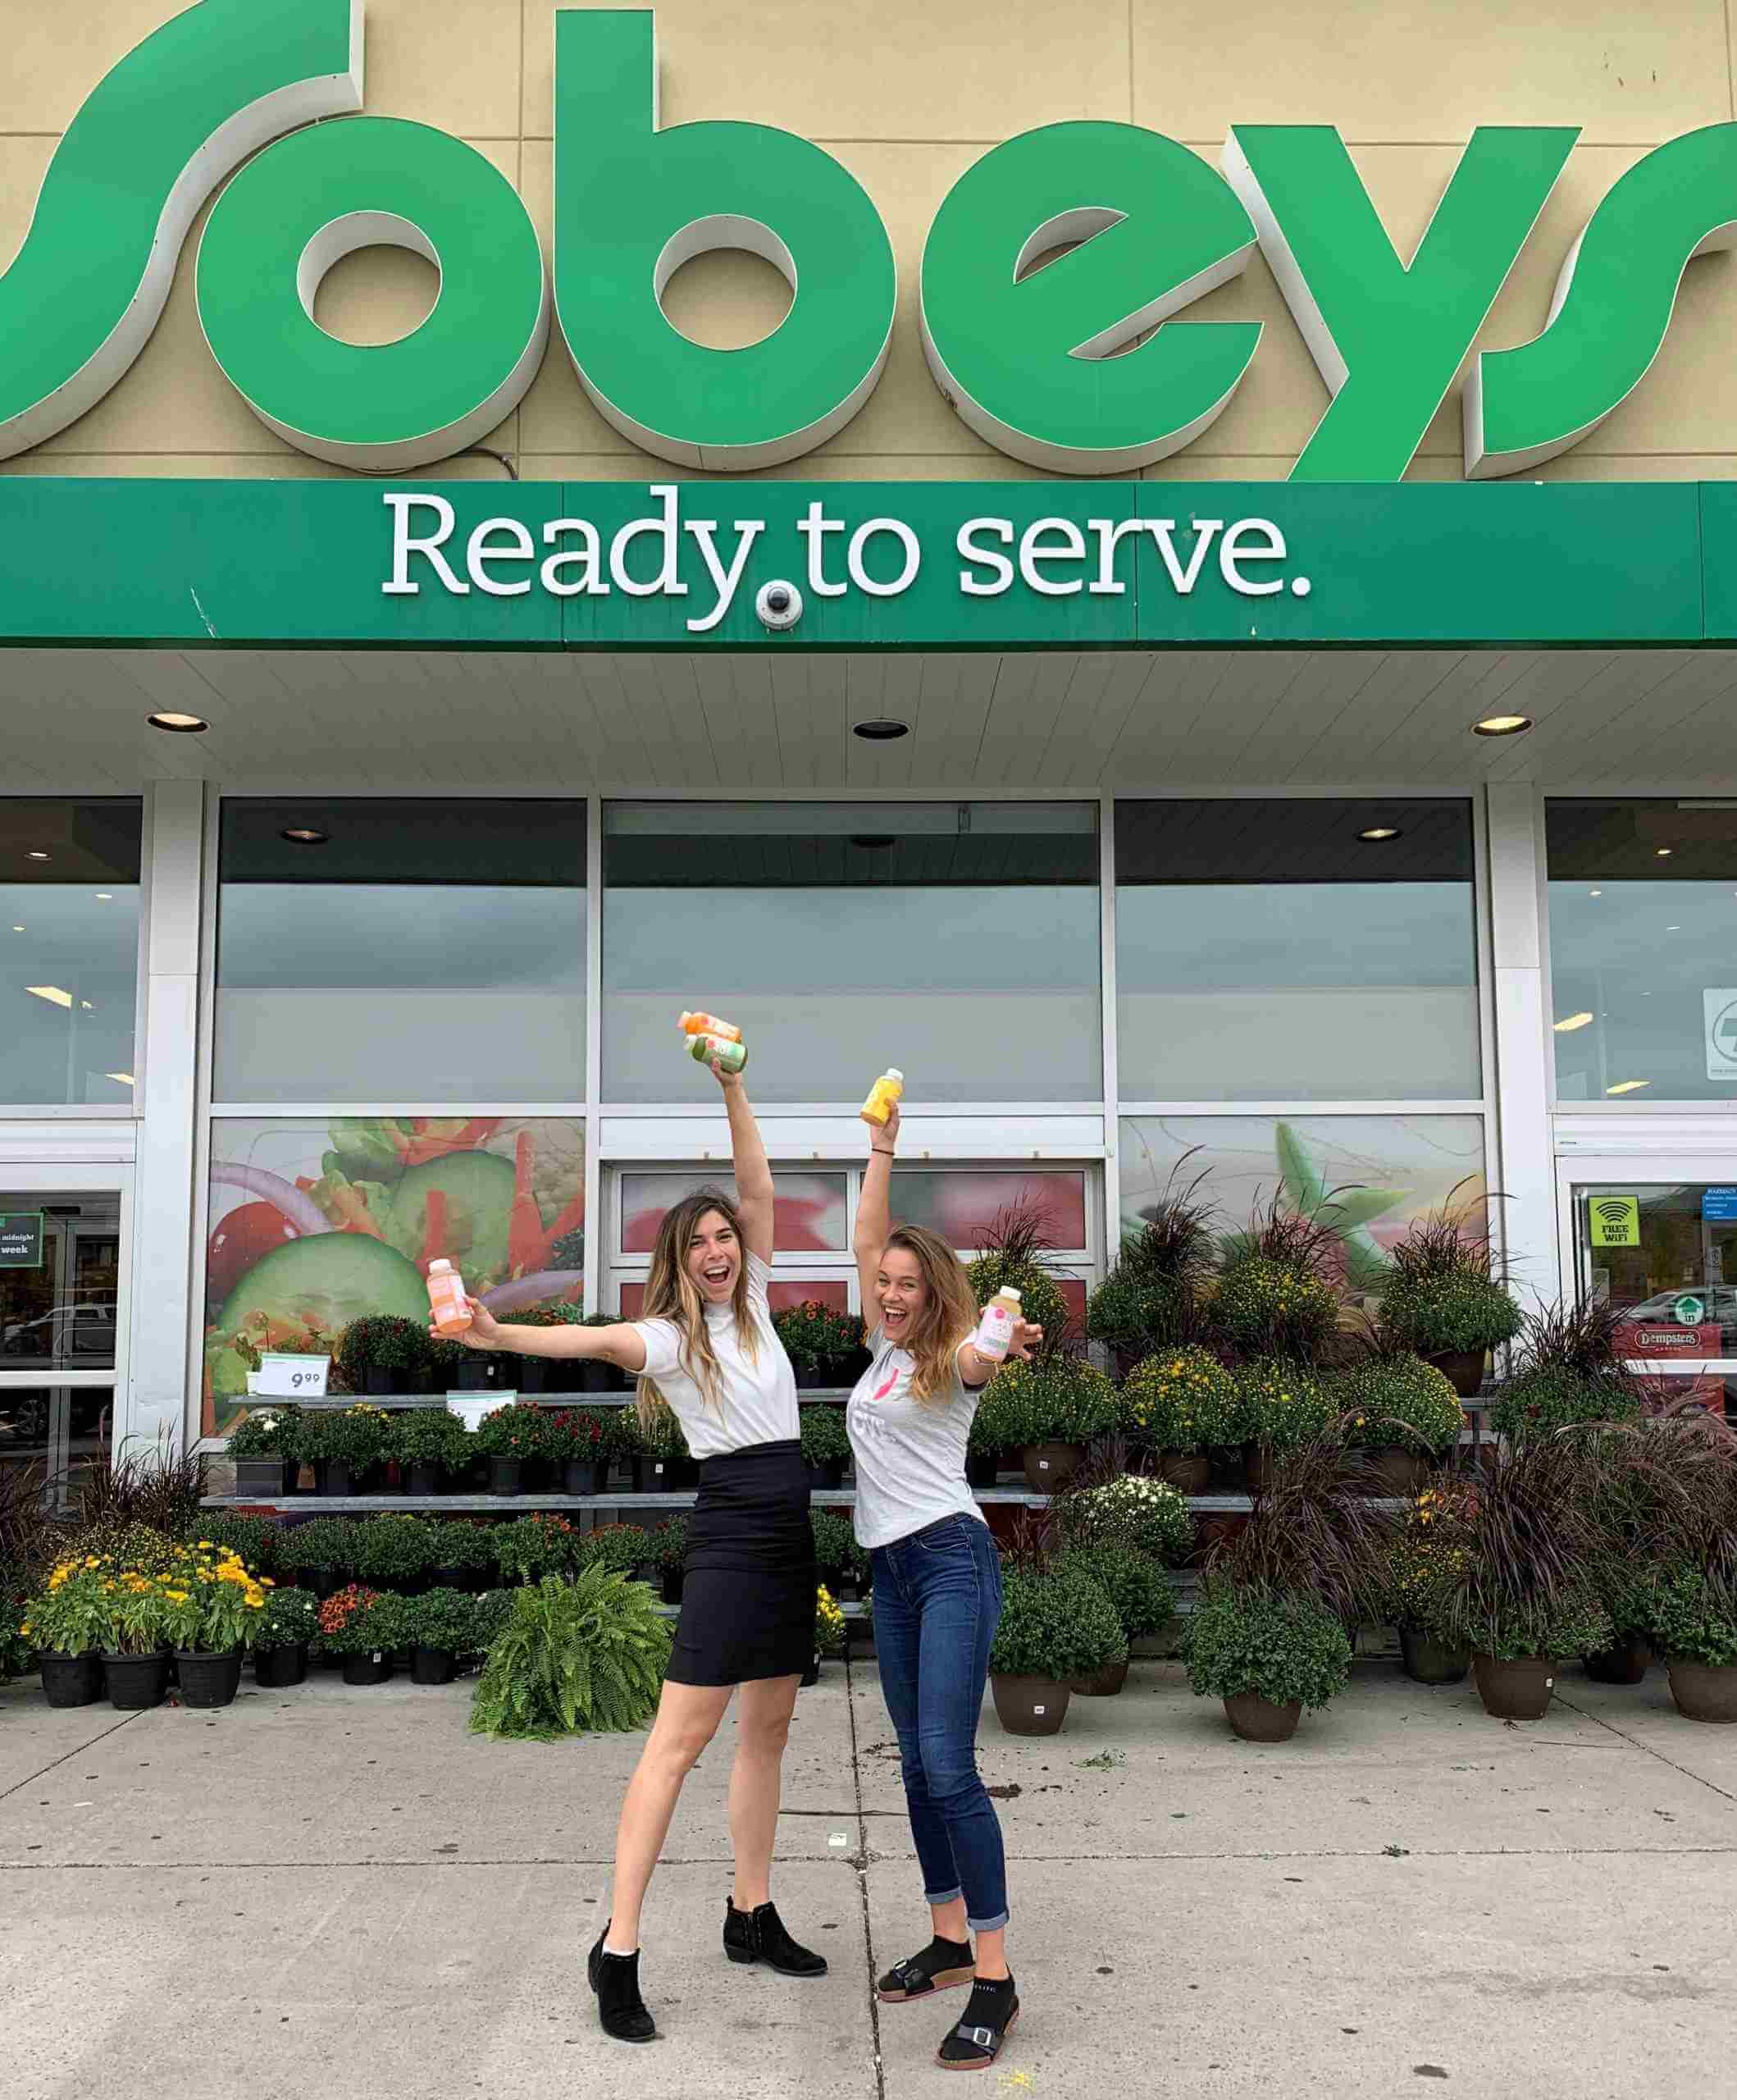 The image depicts two women taking a picture in front of the 'Sobeys Ready to Serve' store while holding bottles of drinks in their hands.